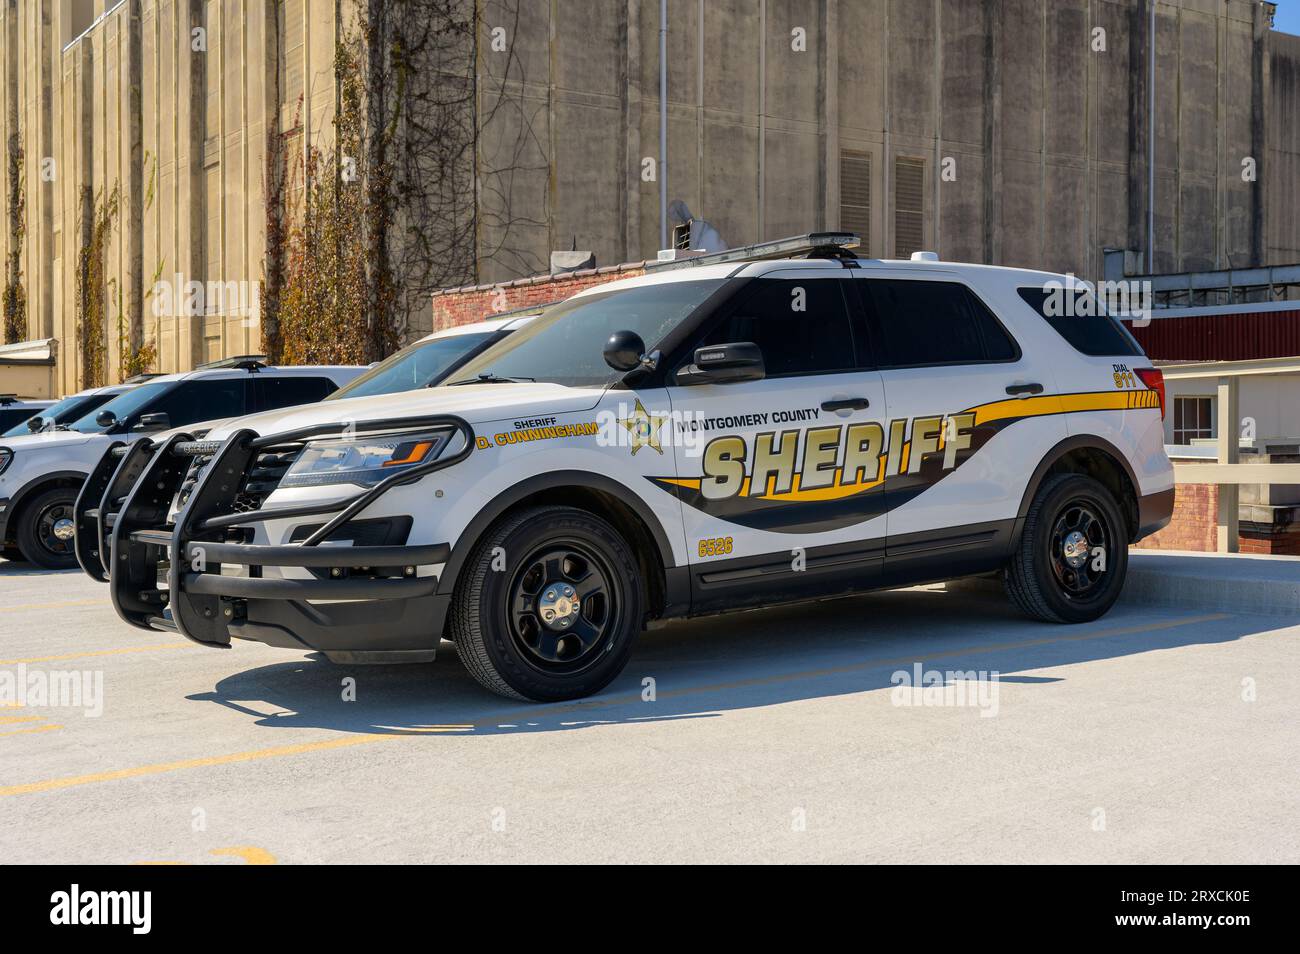 Ford Explorer police SUV or police car or cruiser of the Montgomery County Alabama Sheriff's Office in Montgomery Alabama, USA. Stock Photo